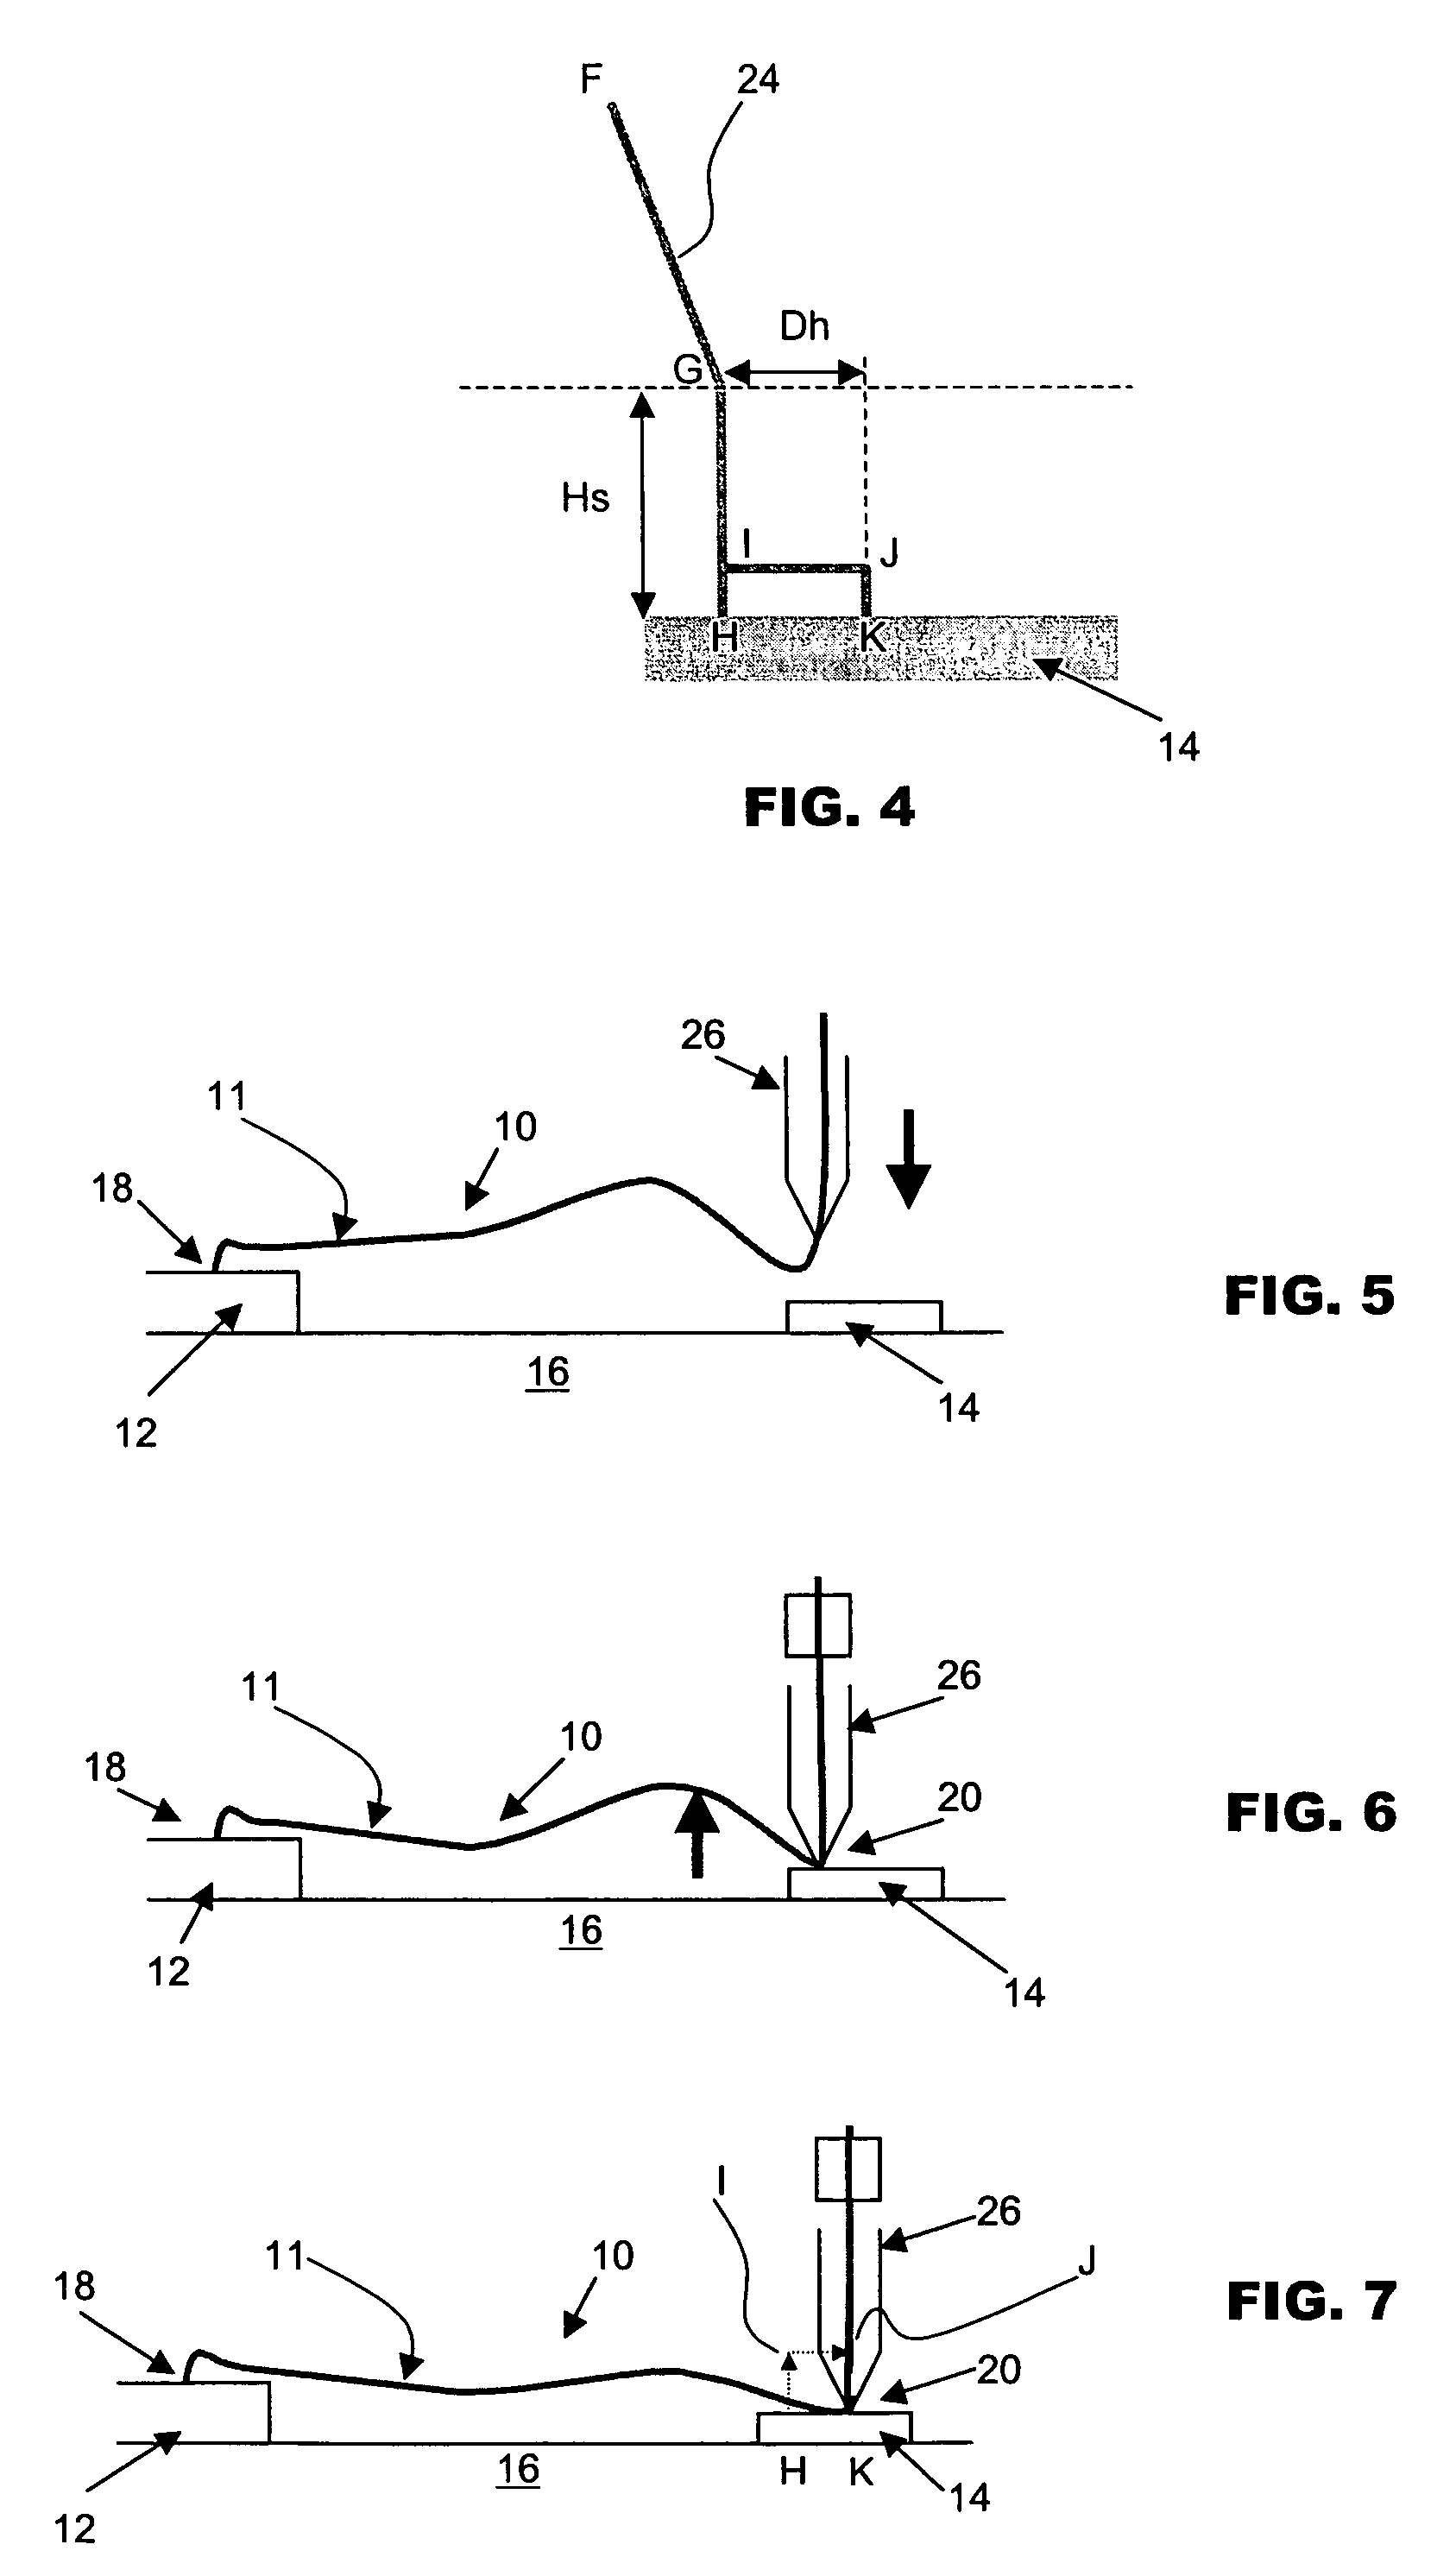 Formation of a wire bond with enhanced pull